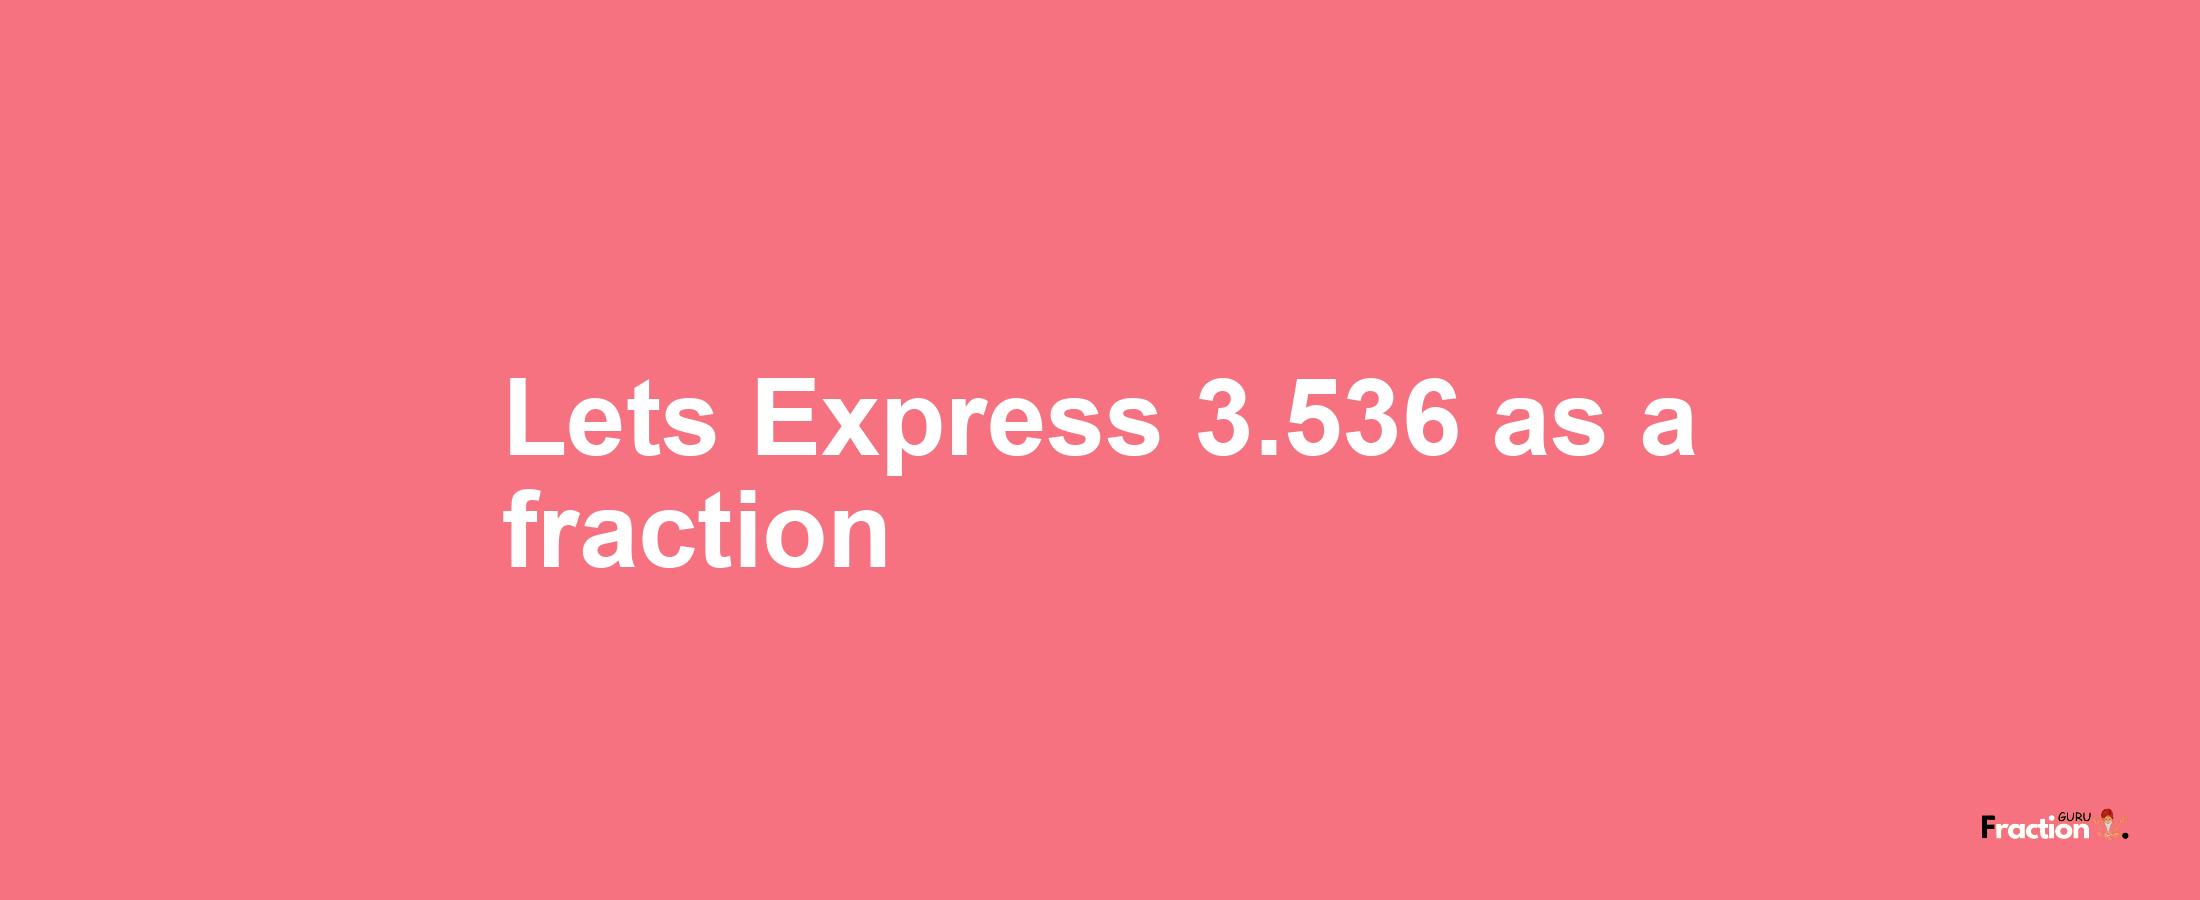 Lets Express 3.536 as afraction